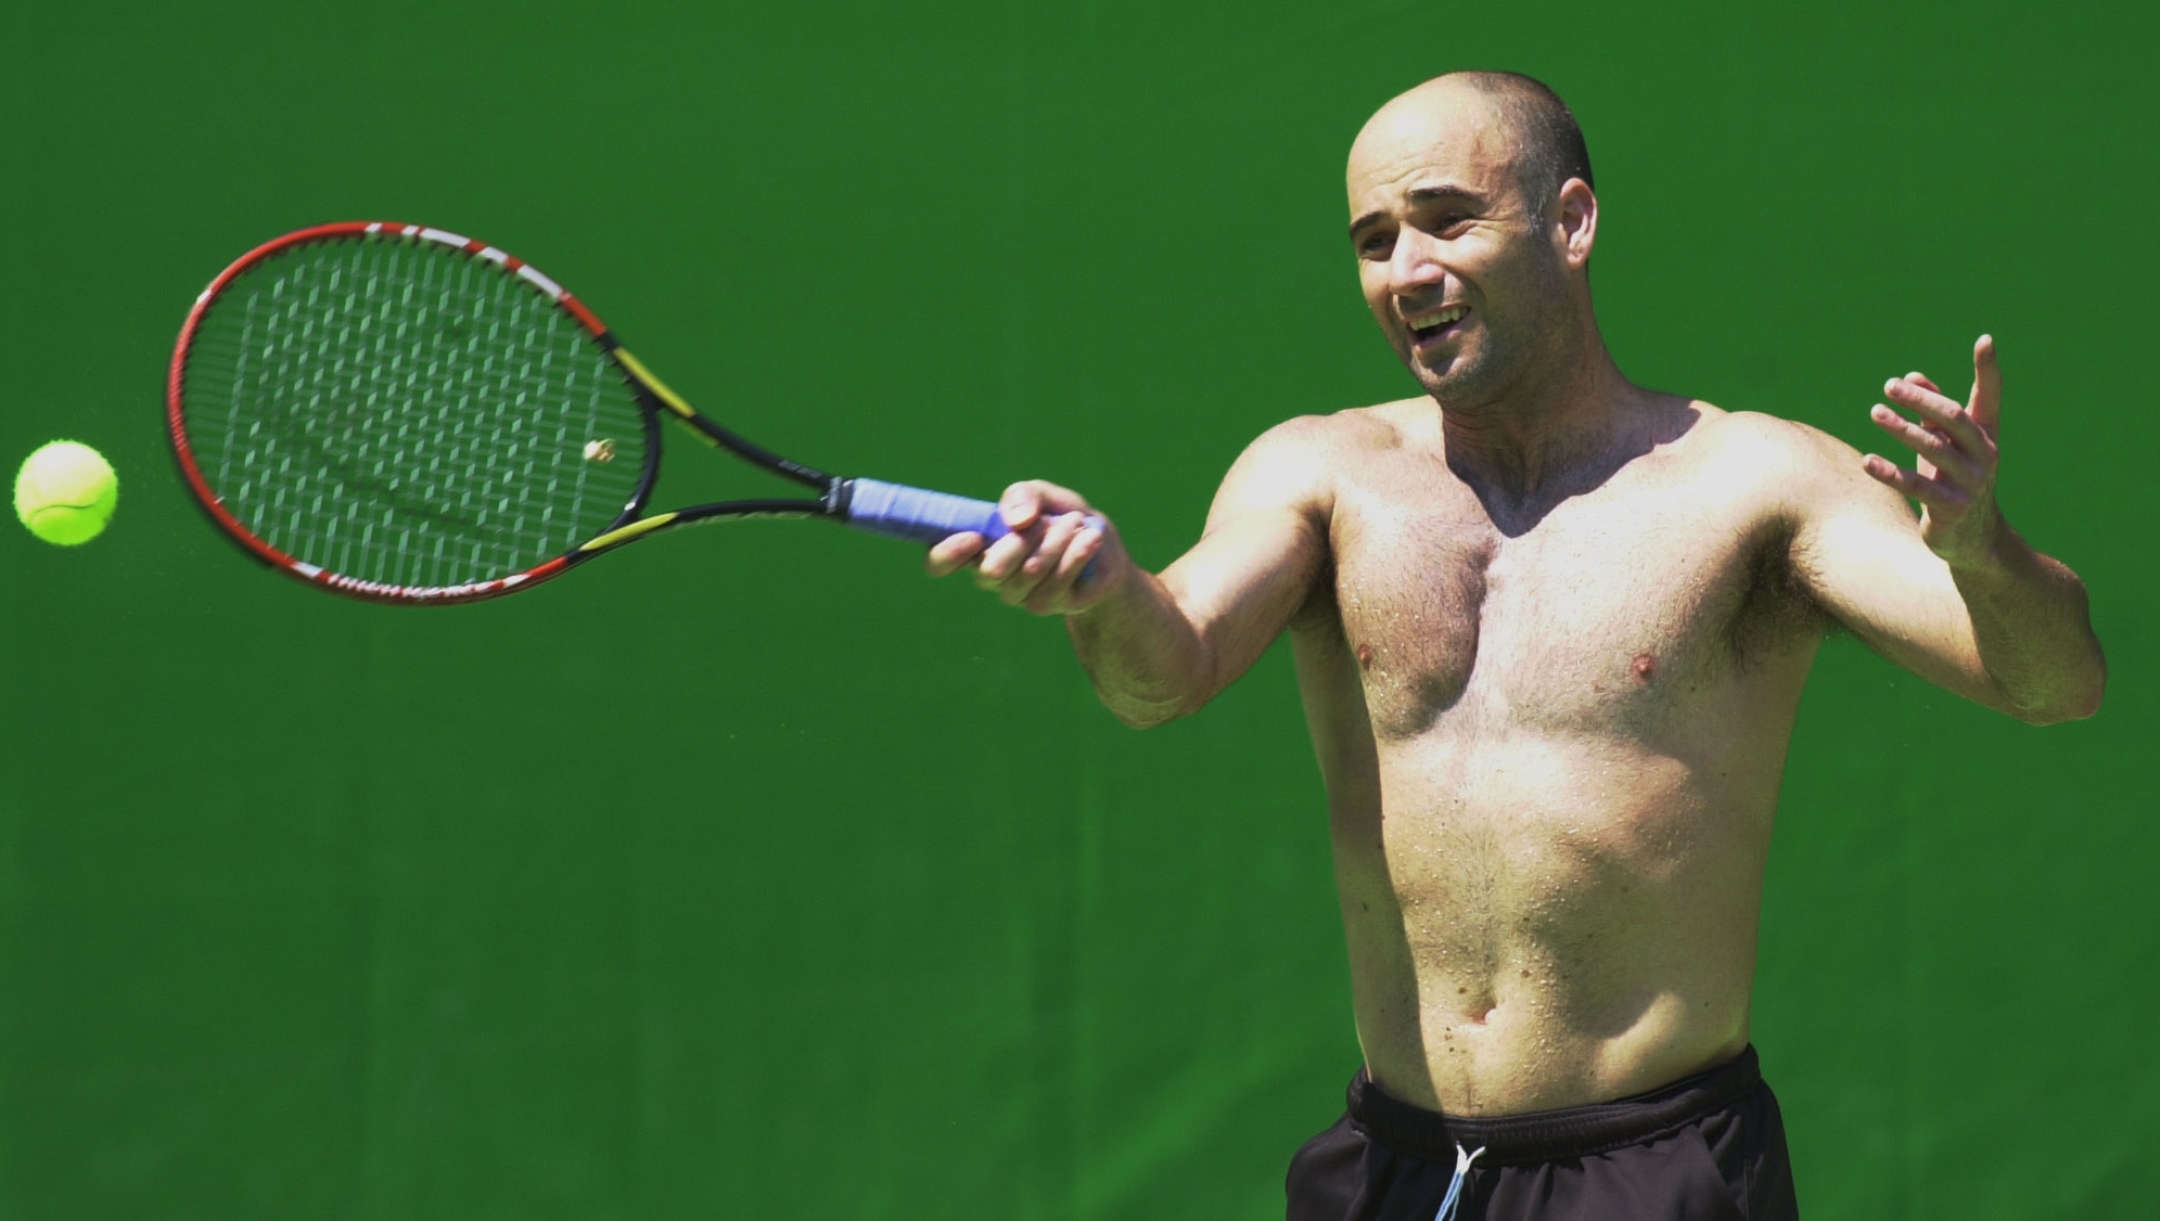 USA's Andre Agassi has his shirt off to combat the heat as he practices for the Australian Open tennis tournament in Melbourne, Sunday, Jan. 12, 2003. The tournament commences Monday Jan. 13. (AP Photo/Steve Holland)